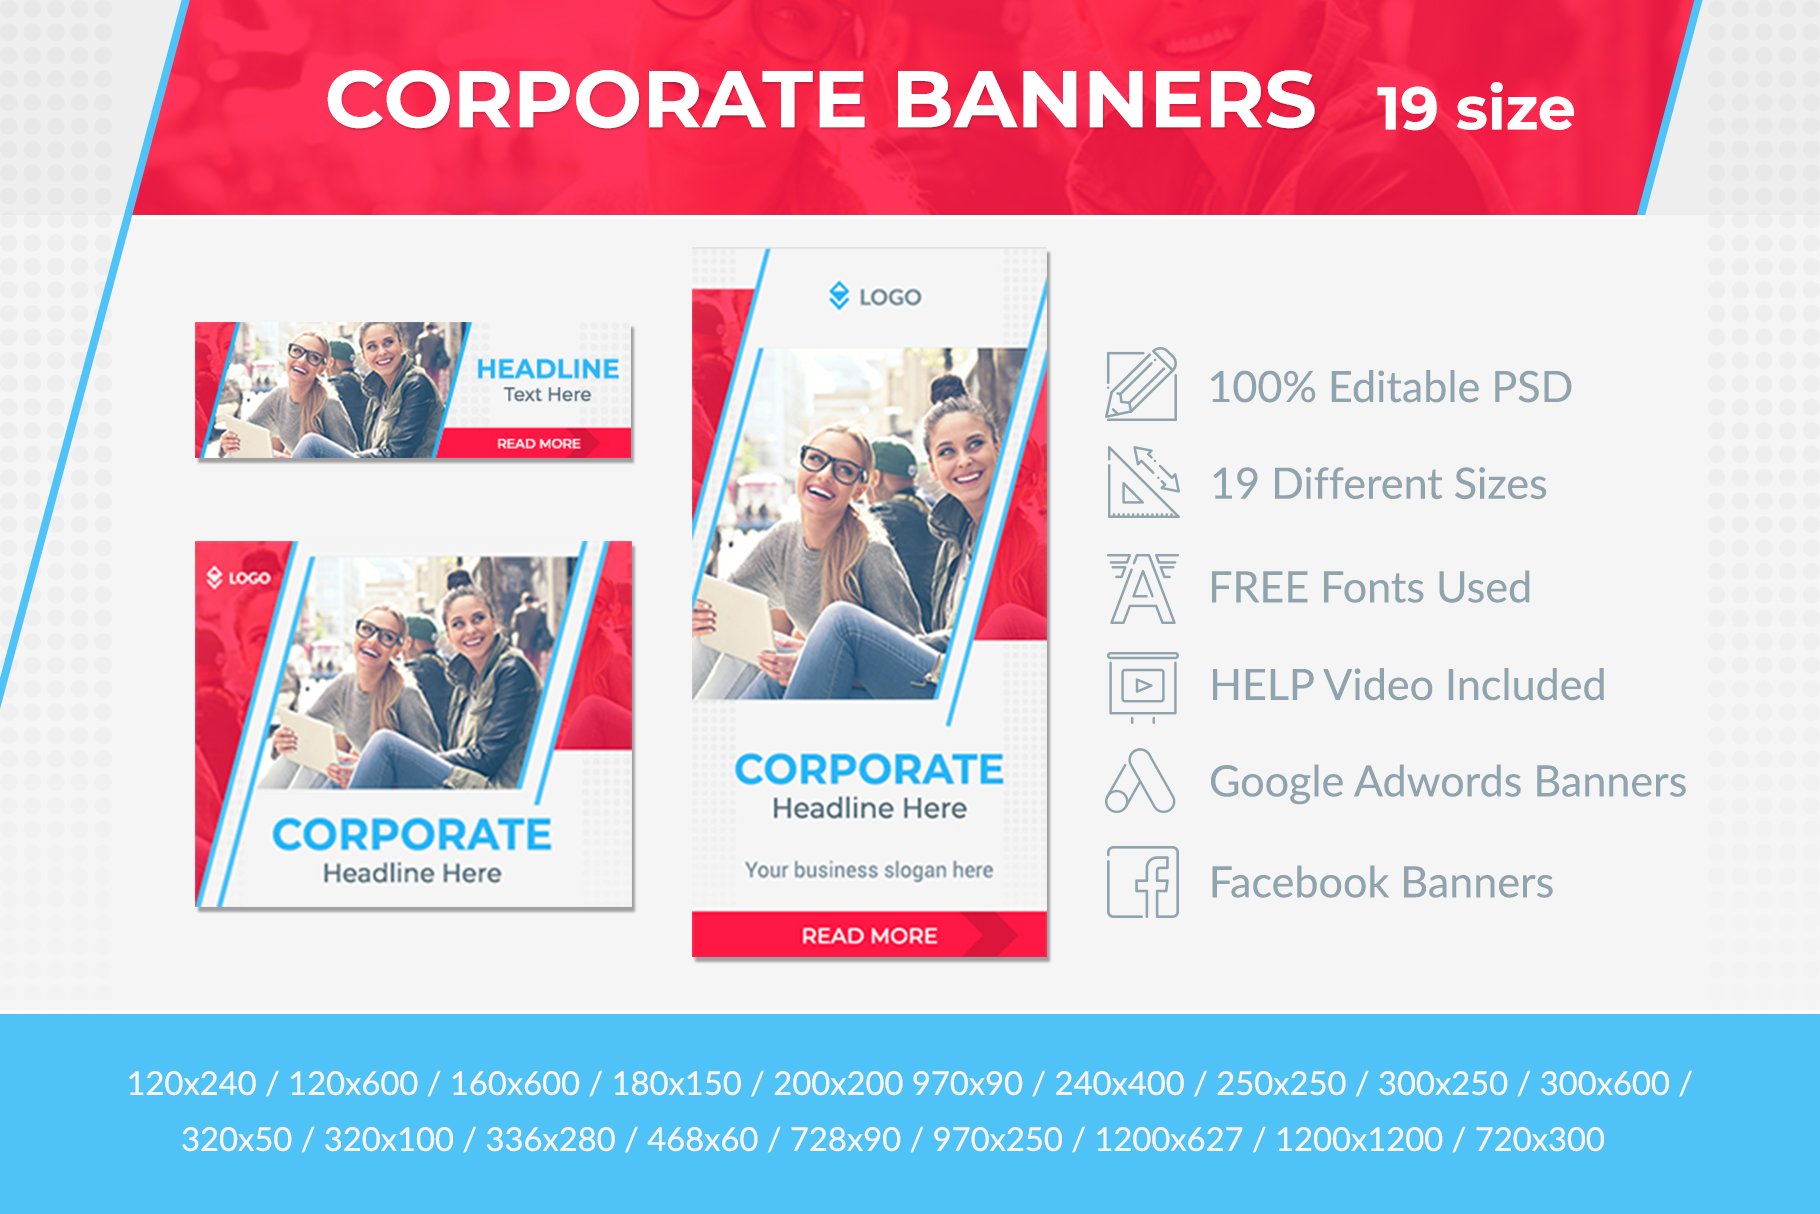 Corporate Banners cover image.